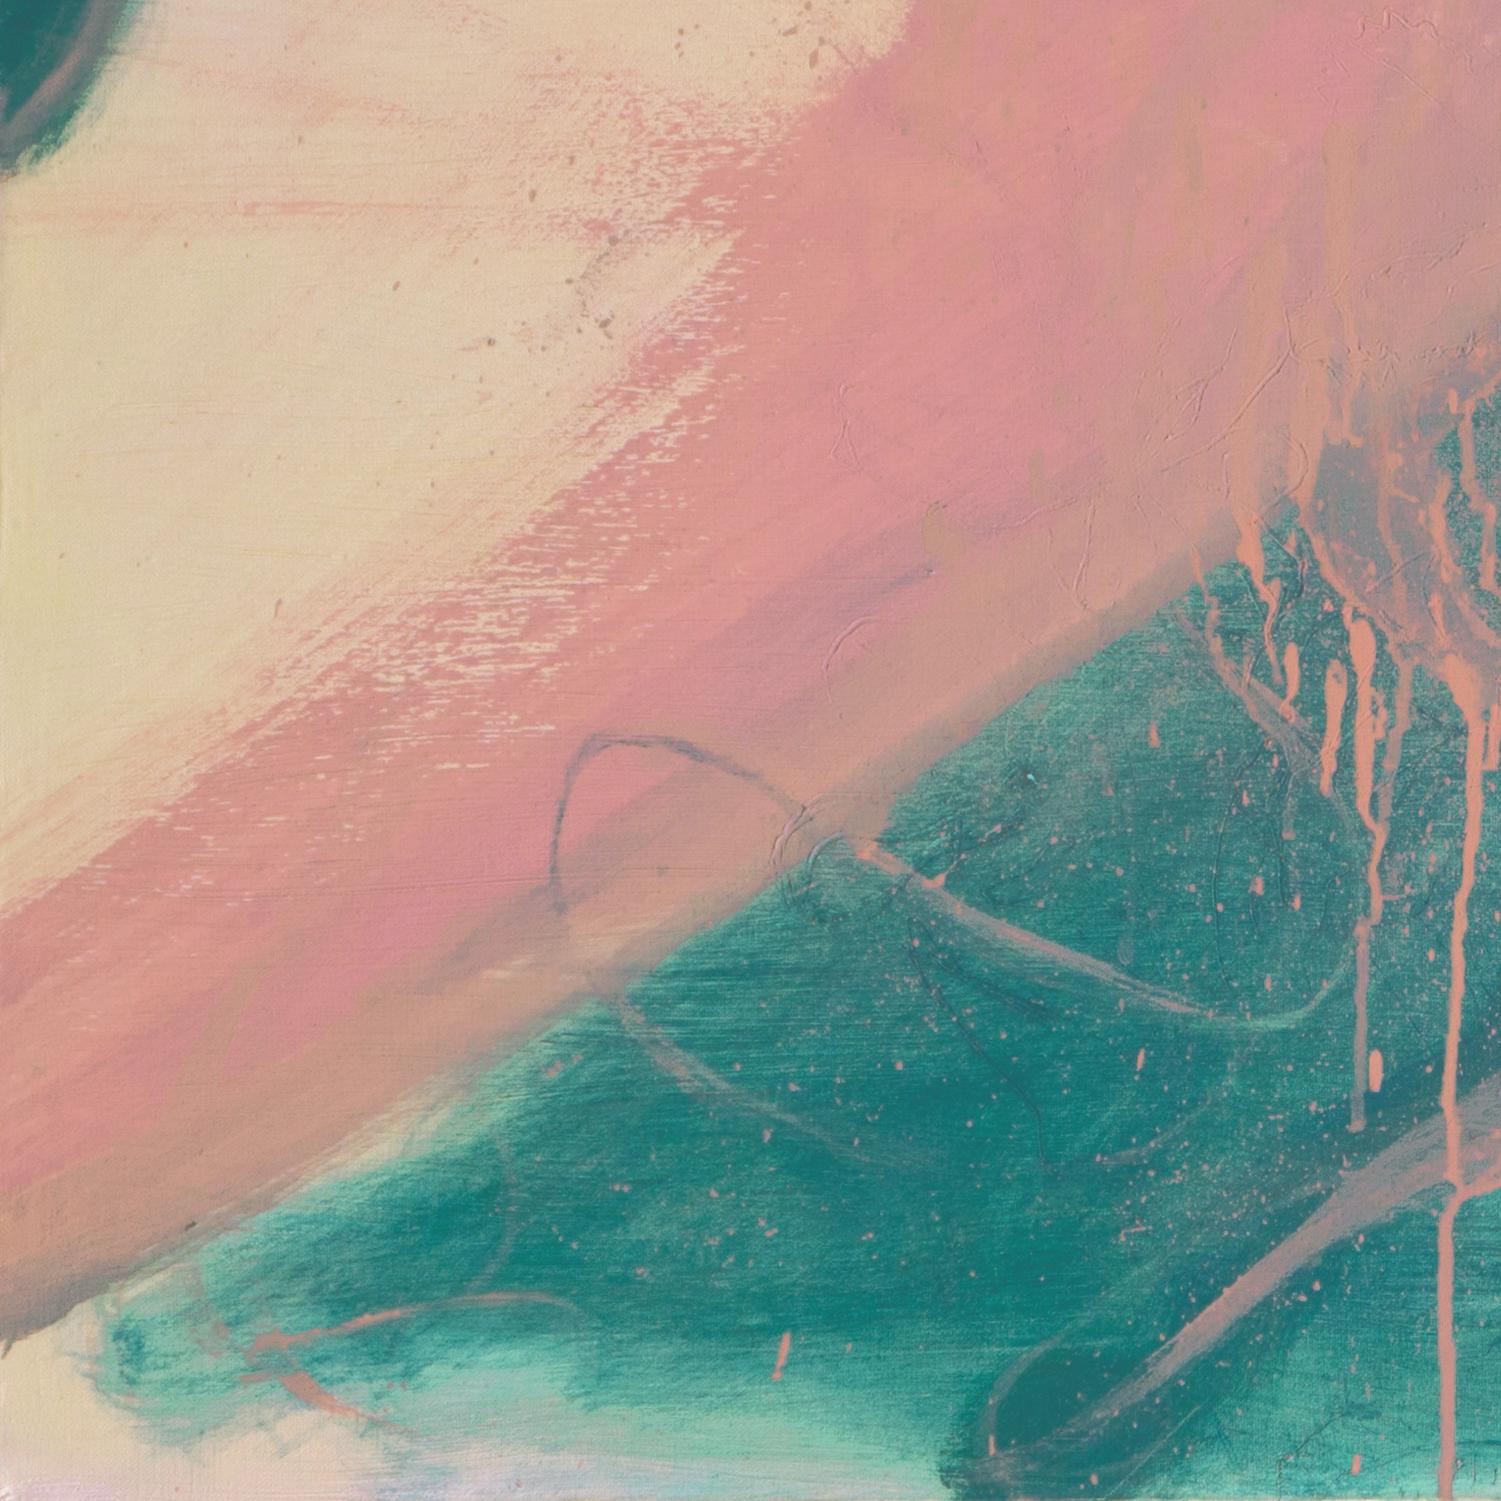 Signed lower right, 'C. Maxwell' (American. 20th Century) and painted circa 1975.

A very substantial, American School oil abstract comprising contiguous and overlapping curvilinear areas of rose and turquoise shown fluidly arcing and overlapping